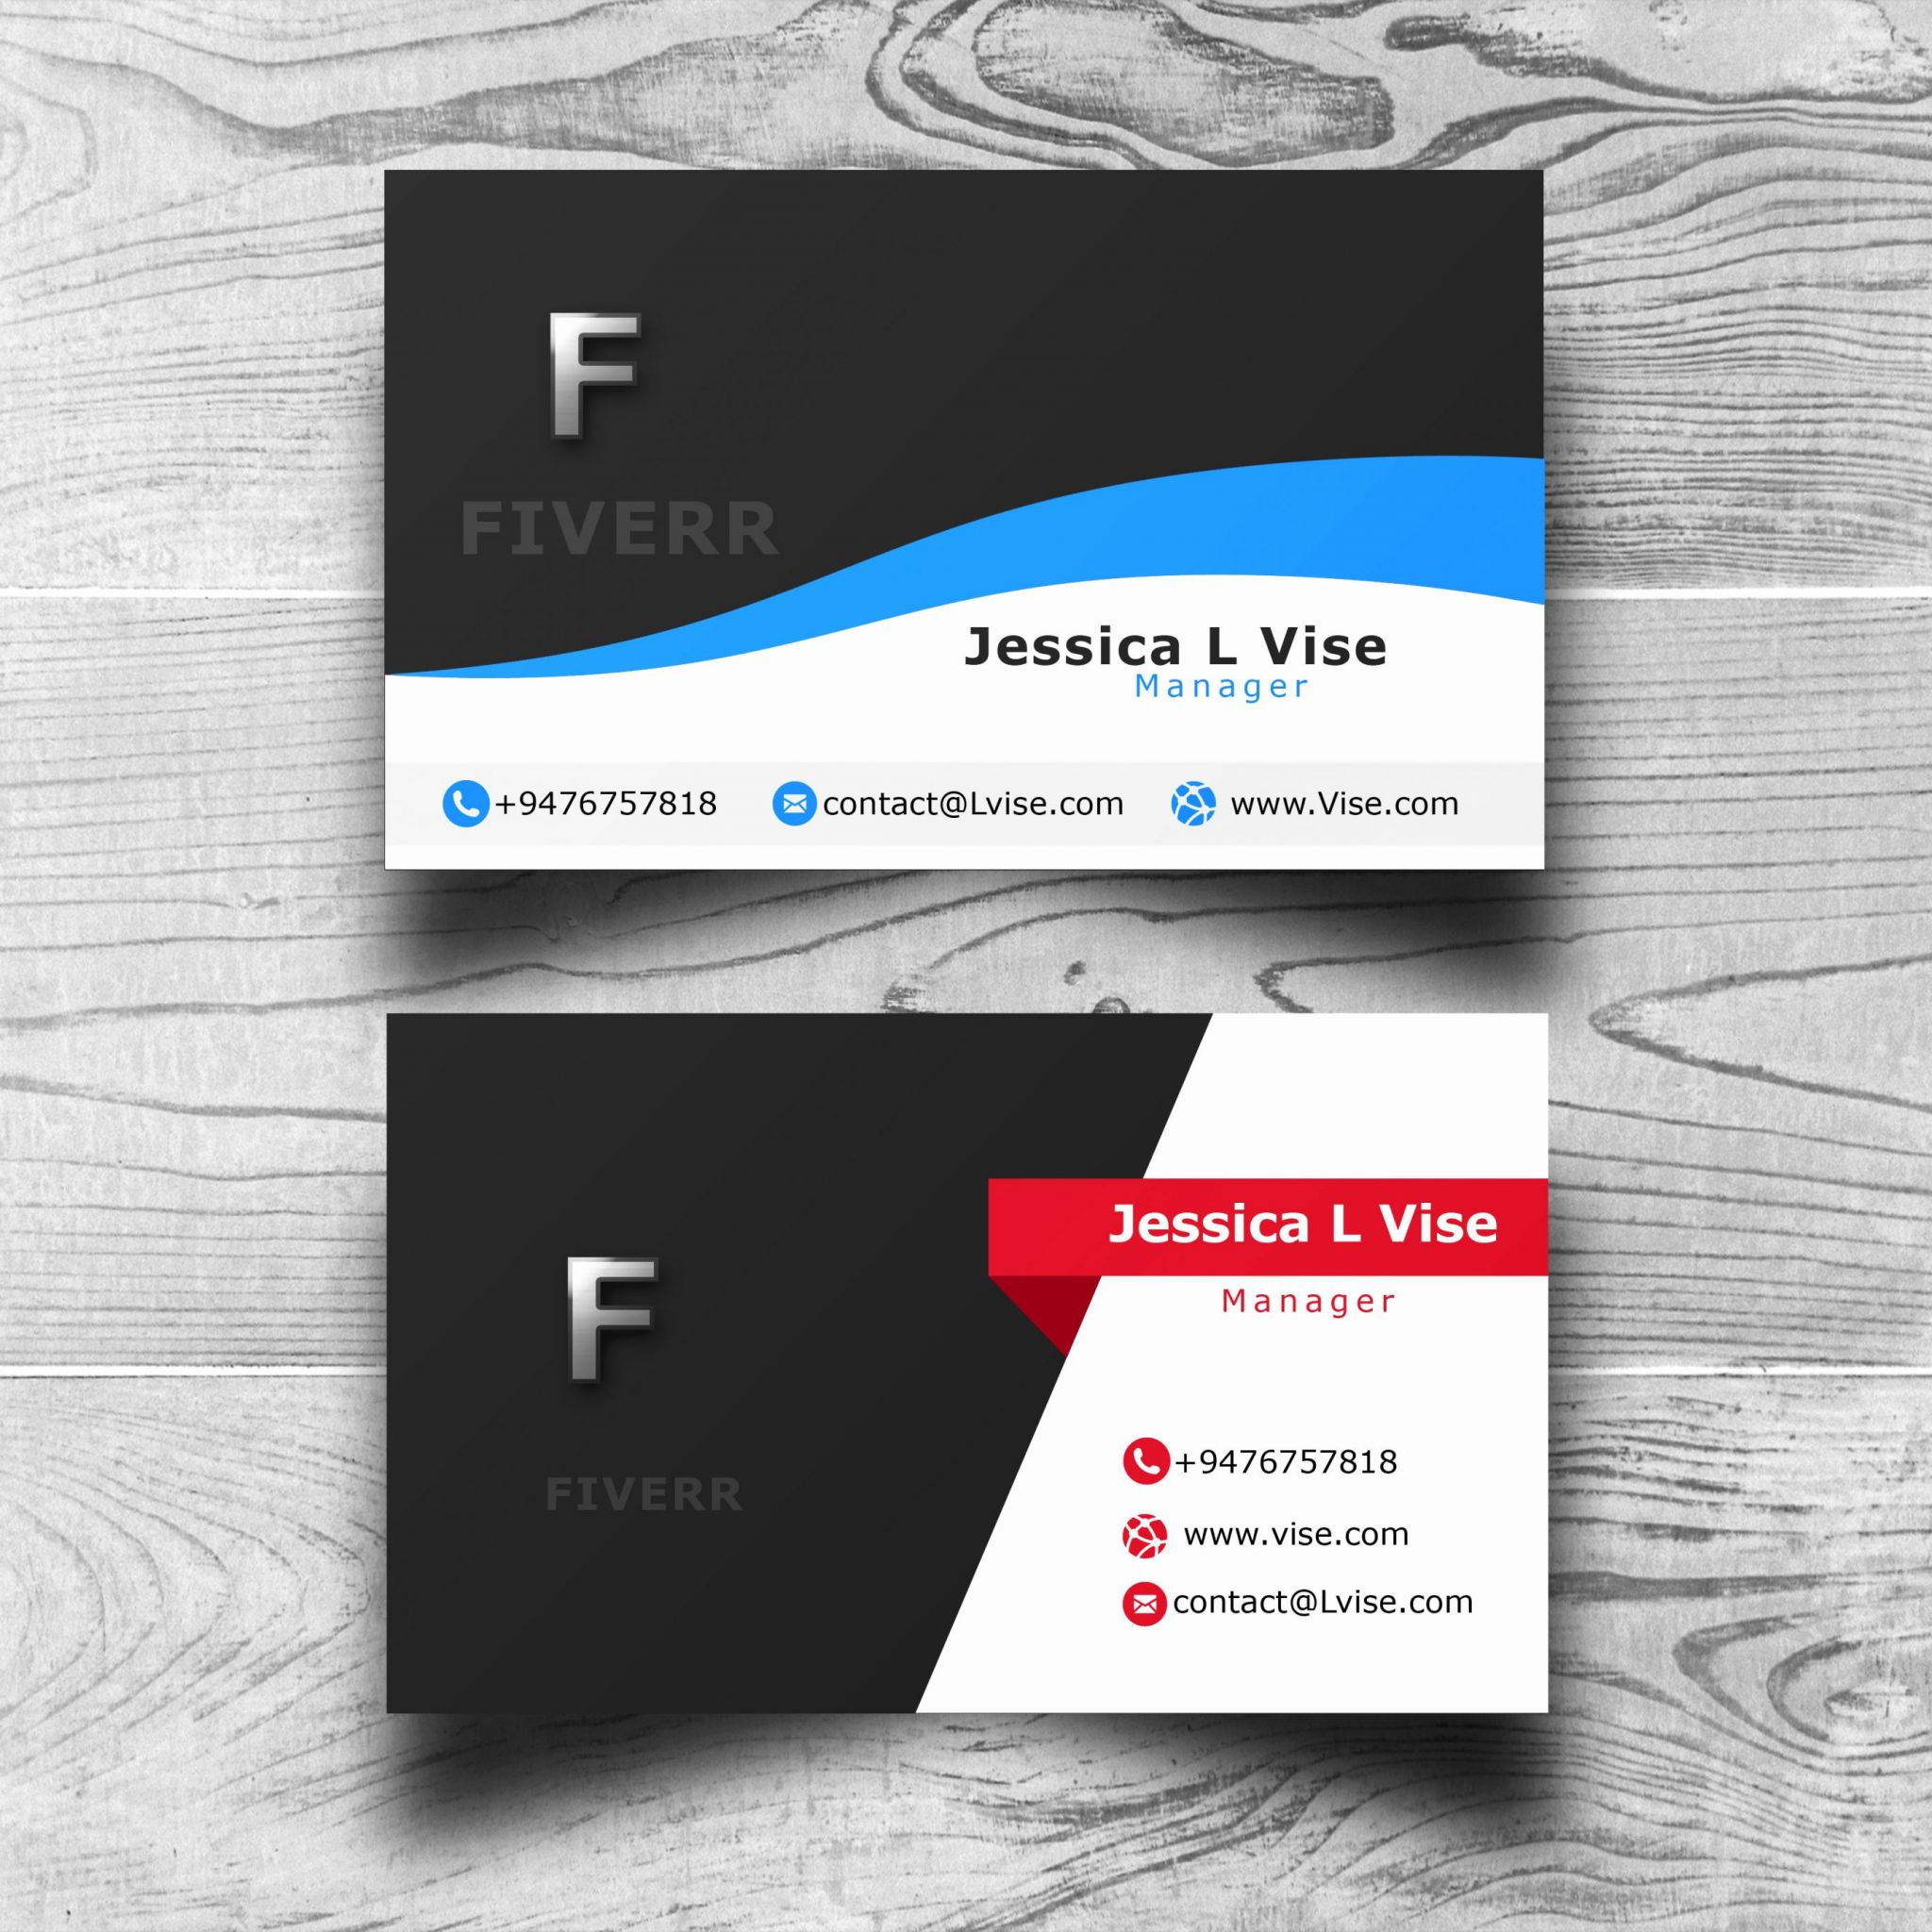 Double Sided Business Card Template Illustrator | Lera Mera Intended For Double Sided Business Card Template Illustrator